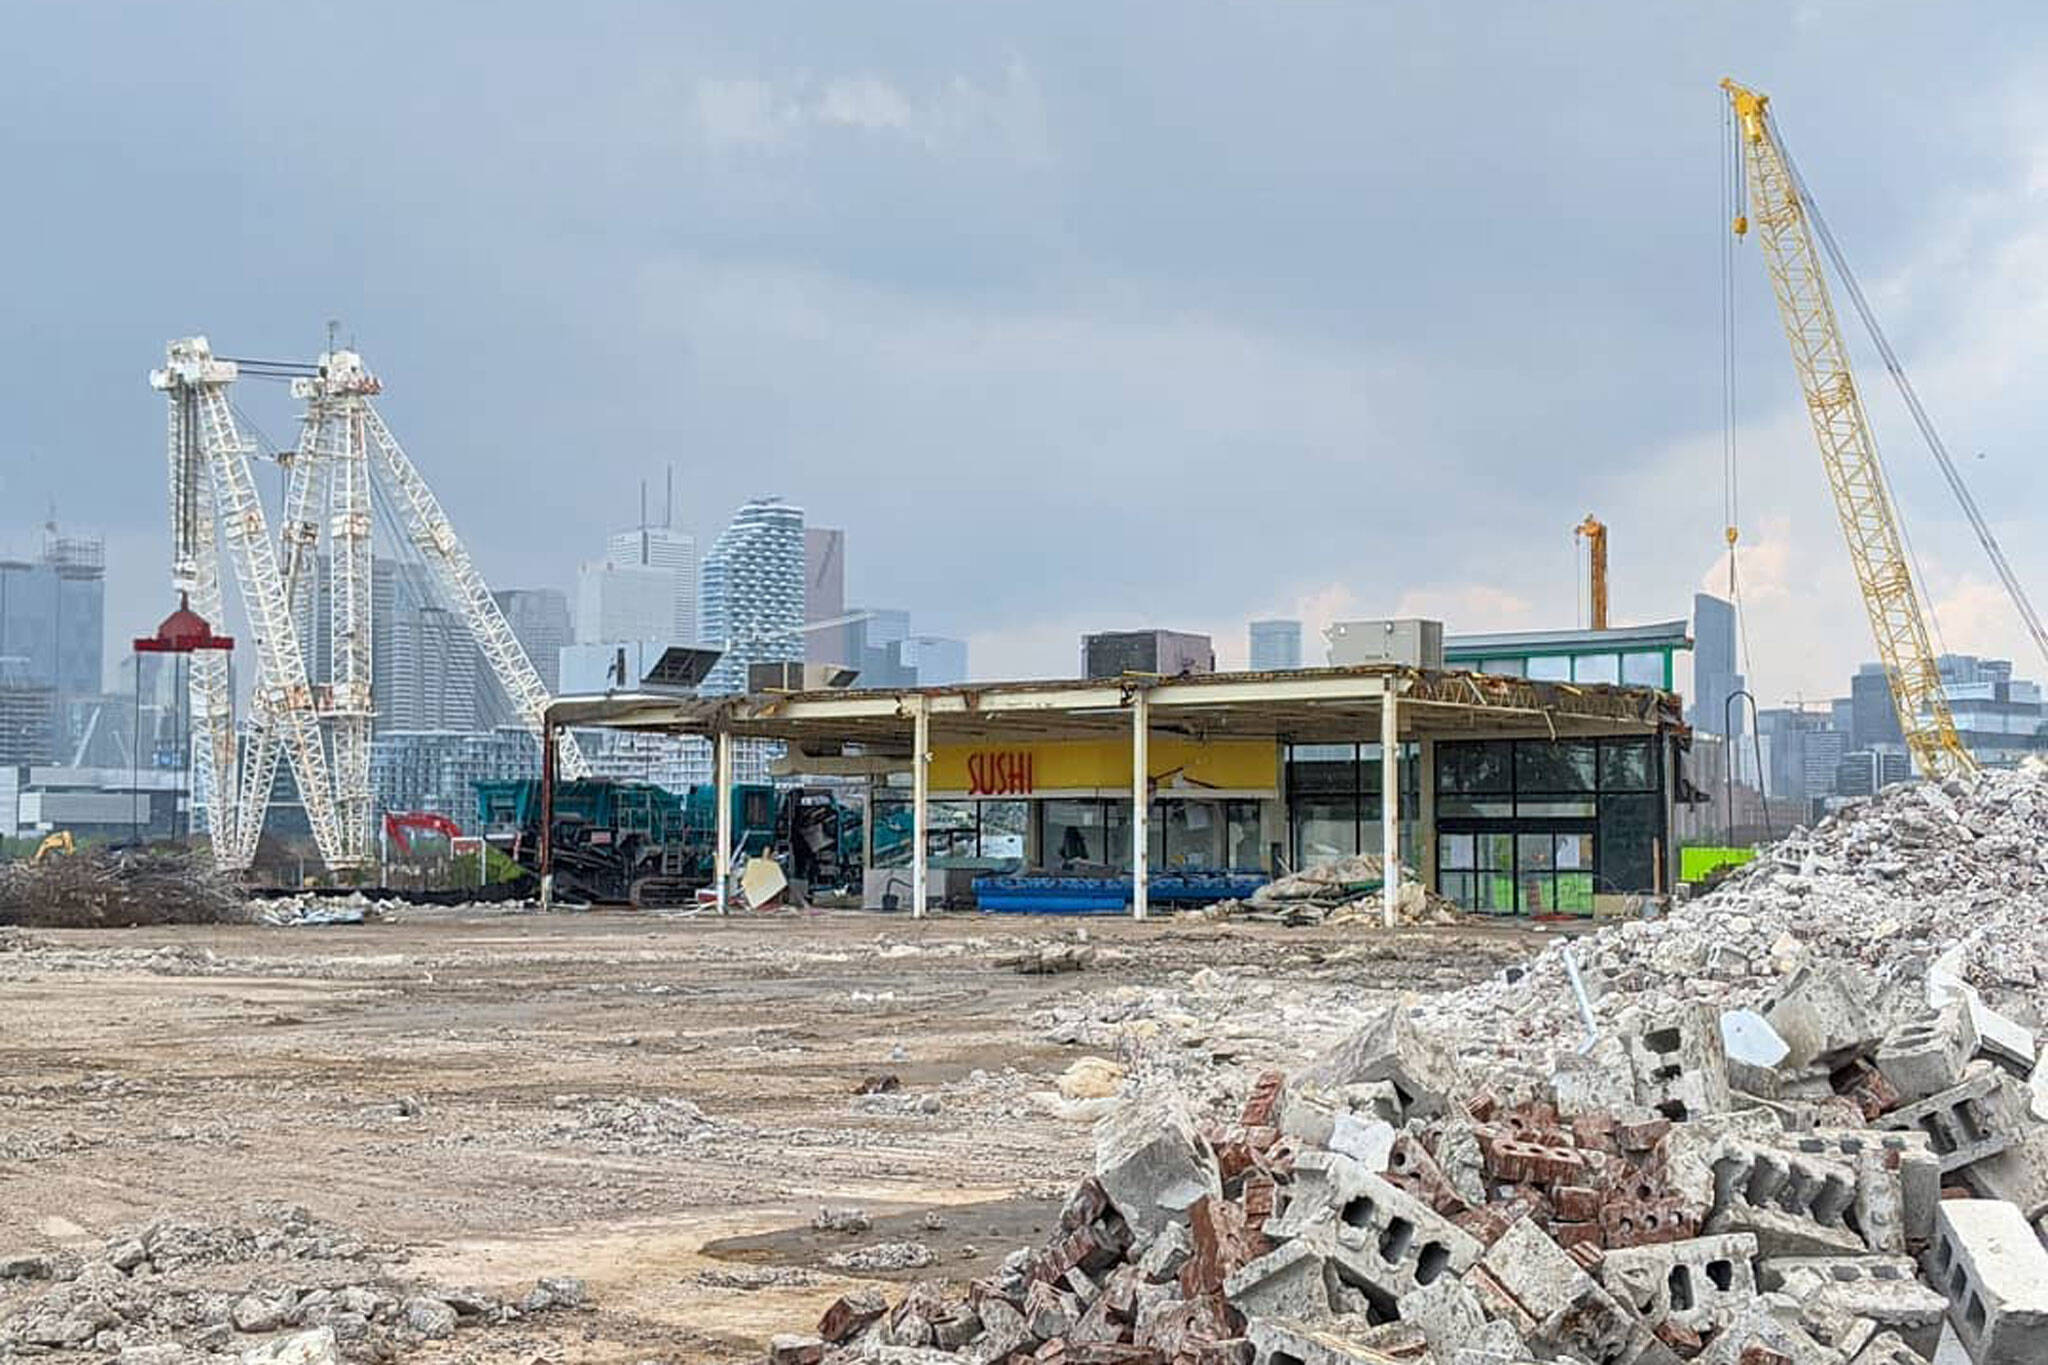 The Closest T T Supermarket To Downtown Toronto Is Now Almost Completely Demolished